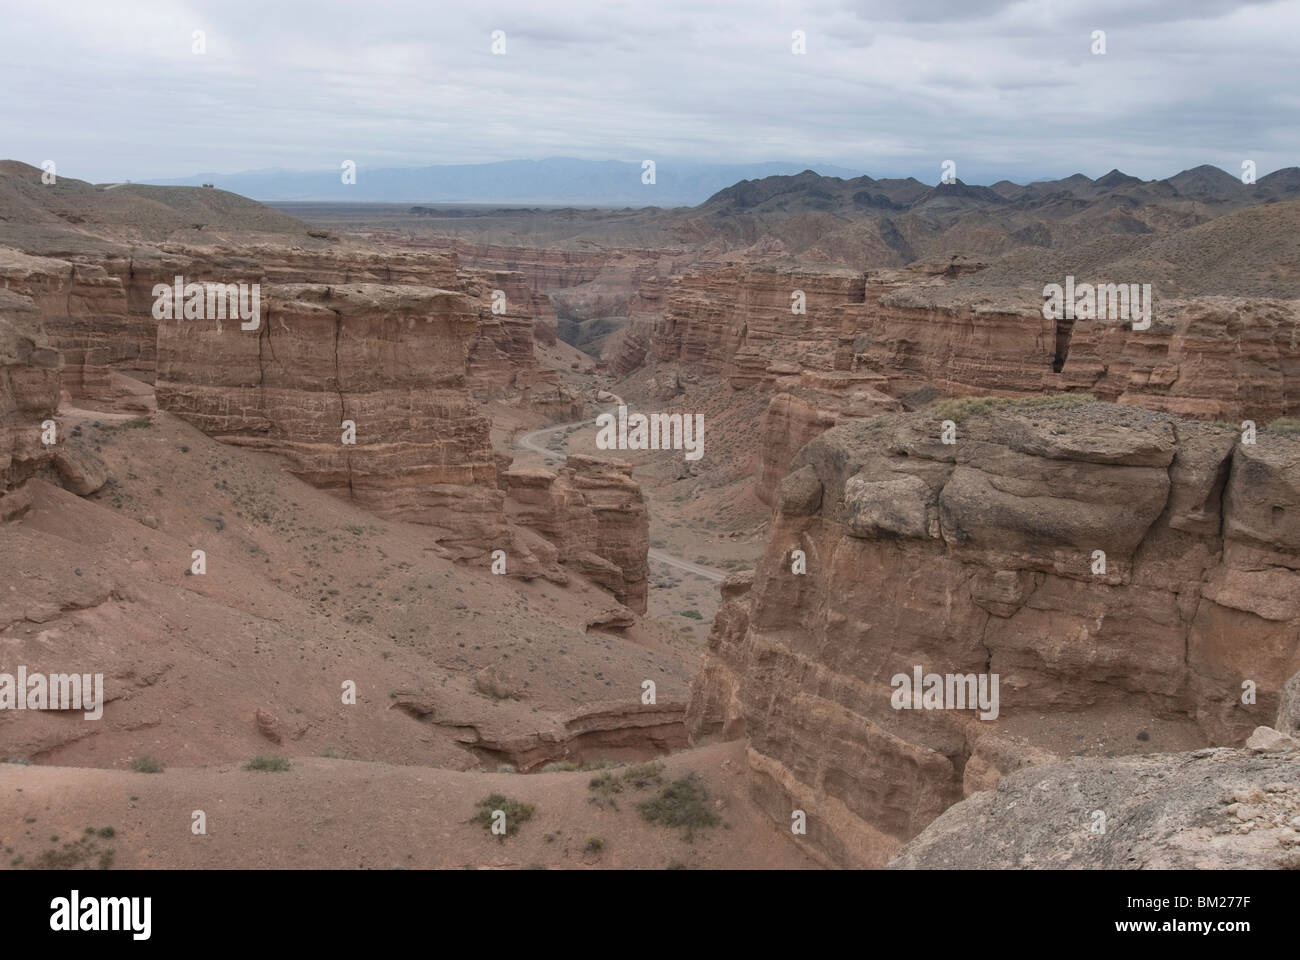 Rock formations in arid landscape at Charyn Canyon, Kazakhstan, Central Asia Stock Photo